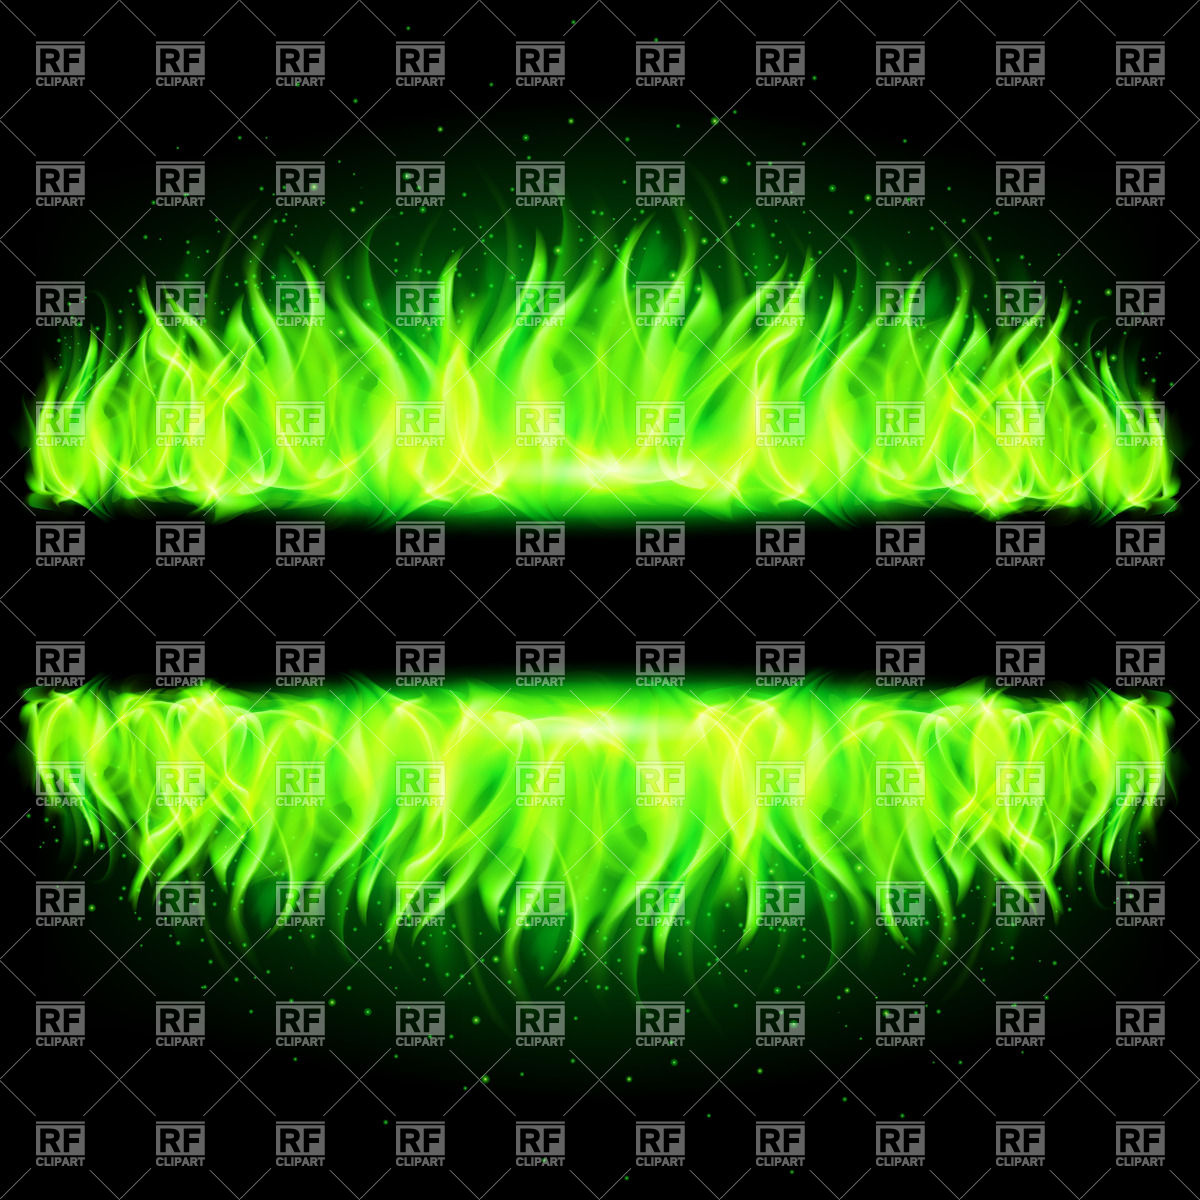 Two Green Walls Of Fire On Black Background 24794 Download Royalty